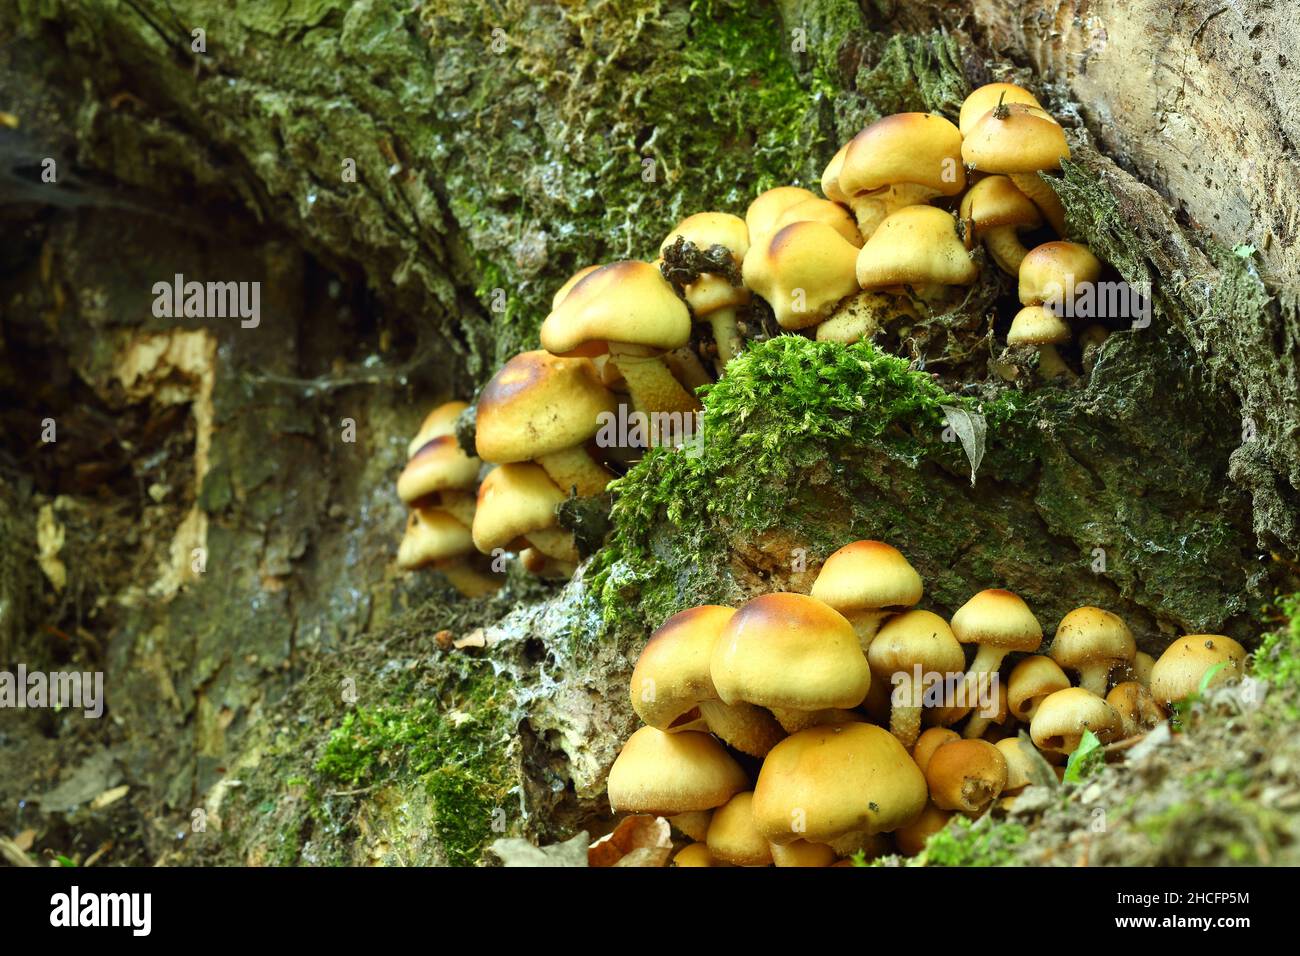 Many brown arboreal mushrooms grown in the forest in autumn Stock Photo